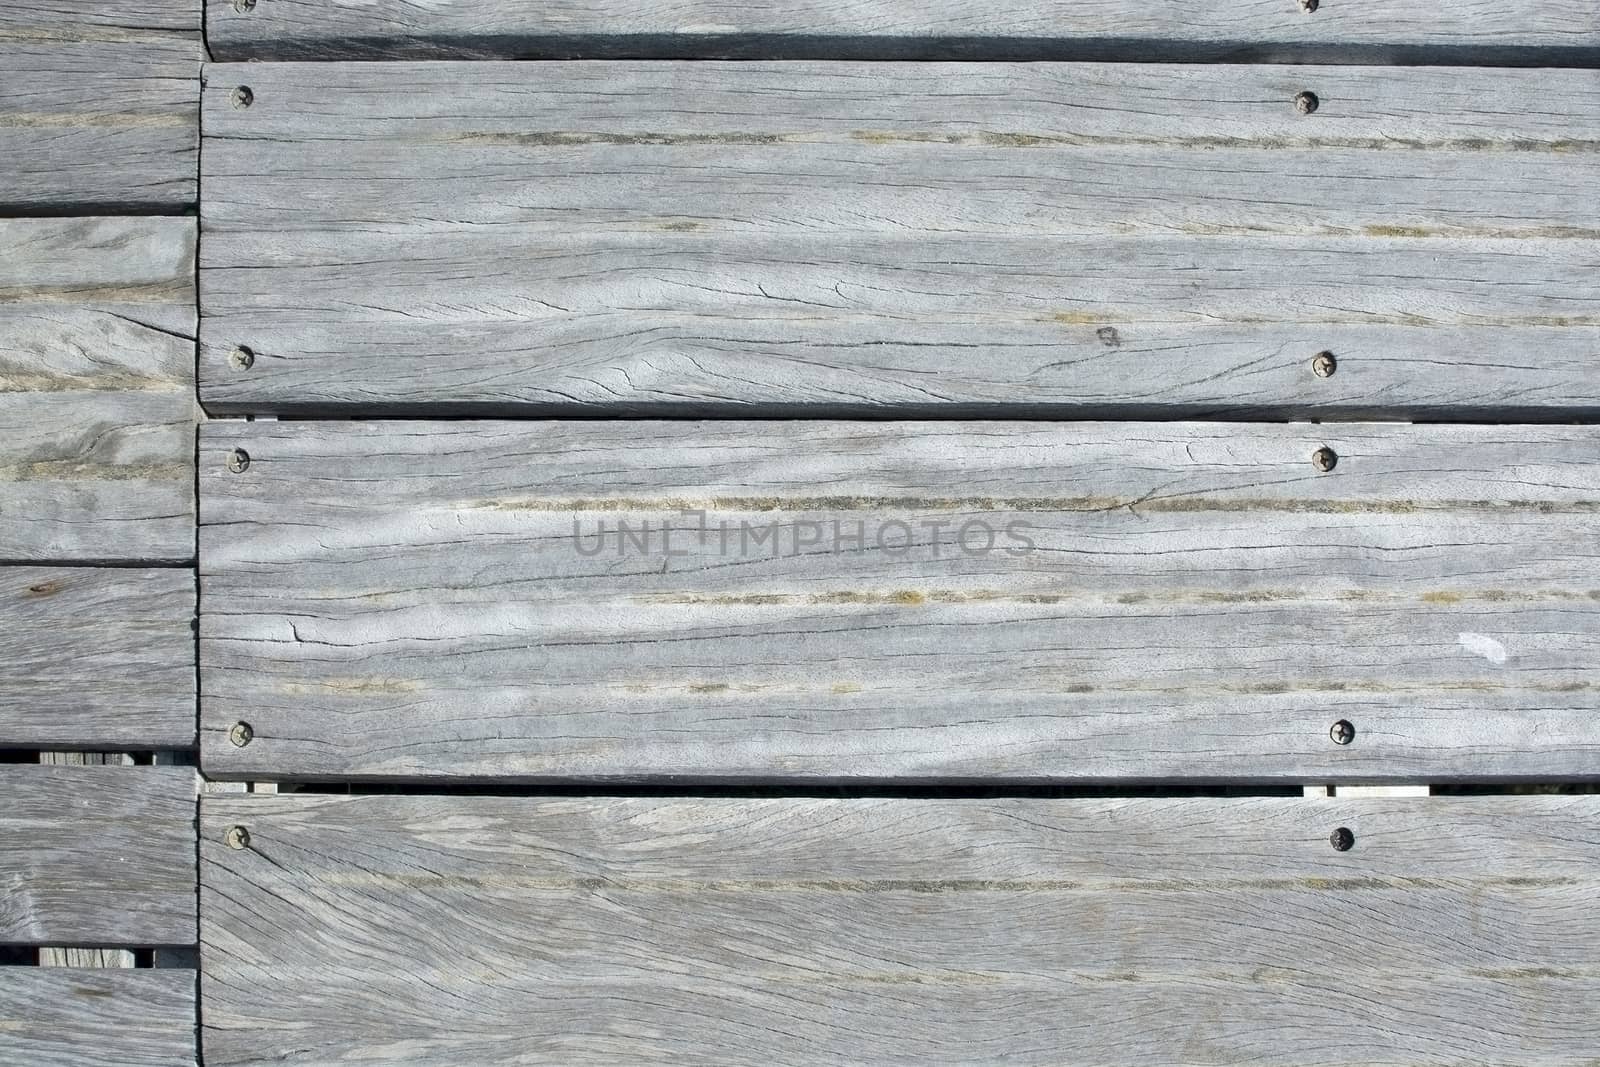 Soft gray brown wood board background texture by ArtesiaWells